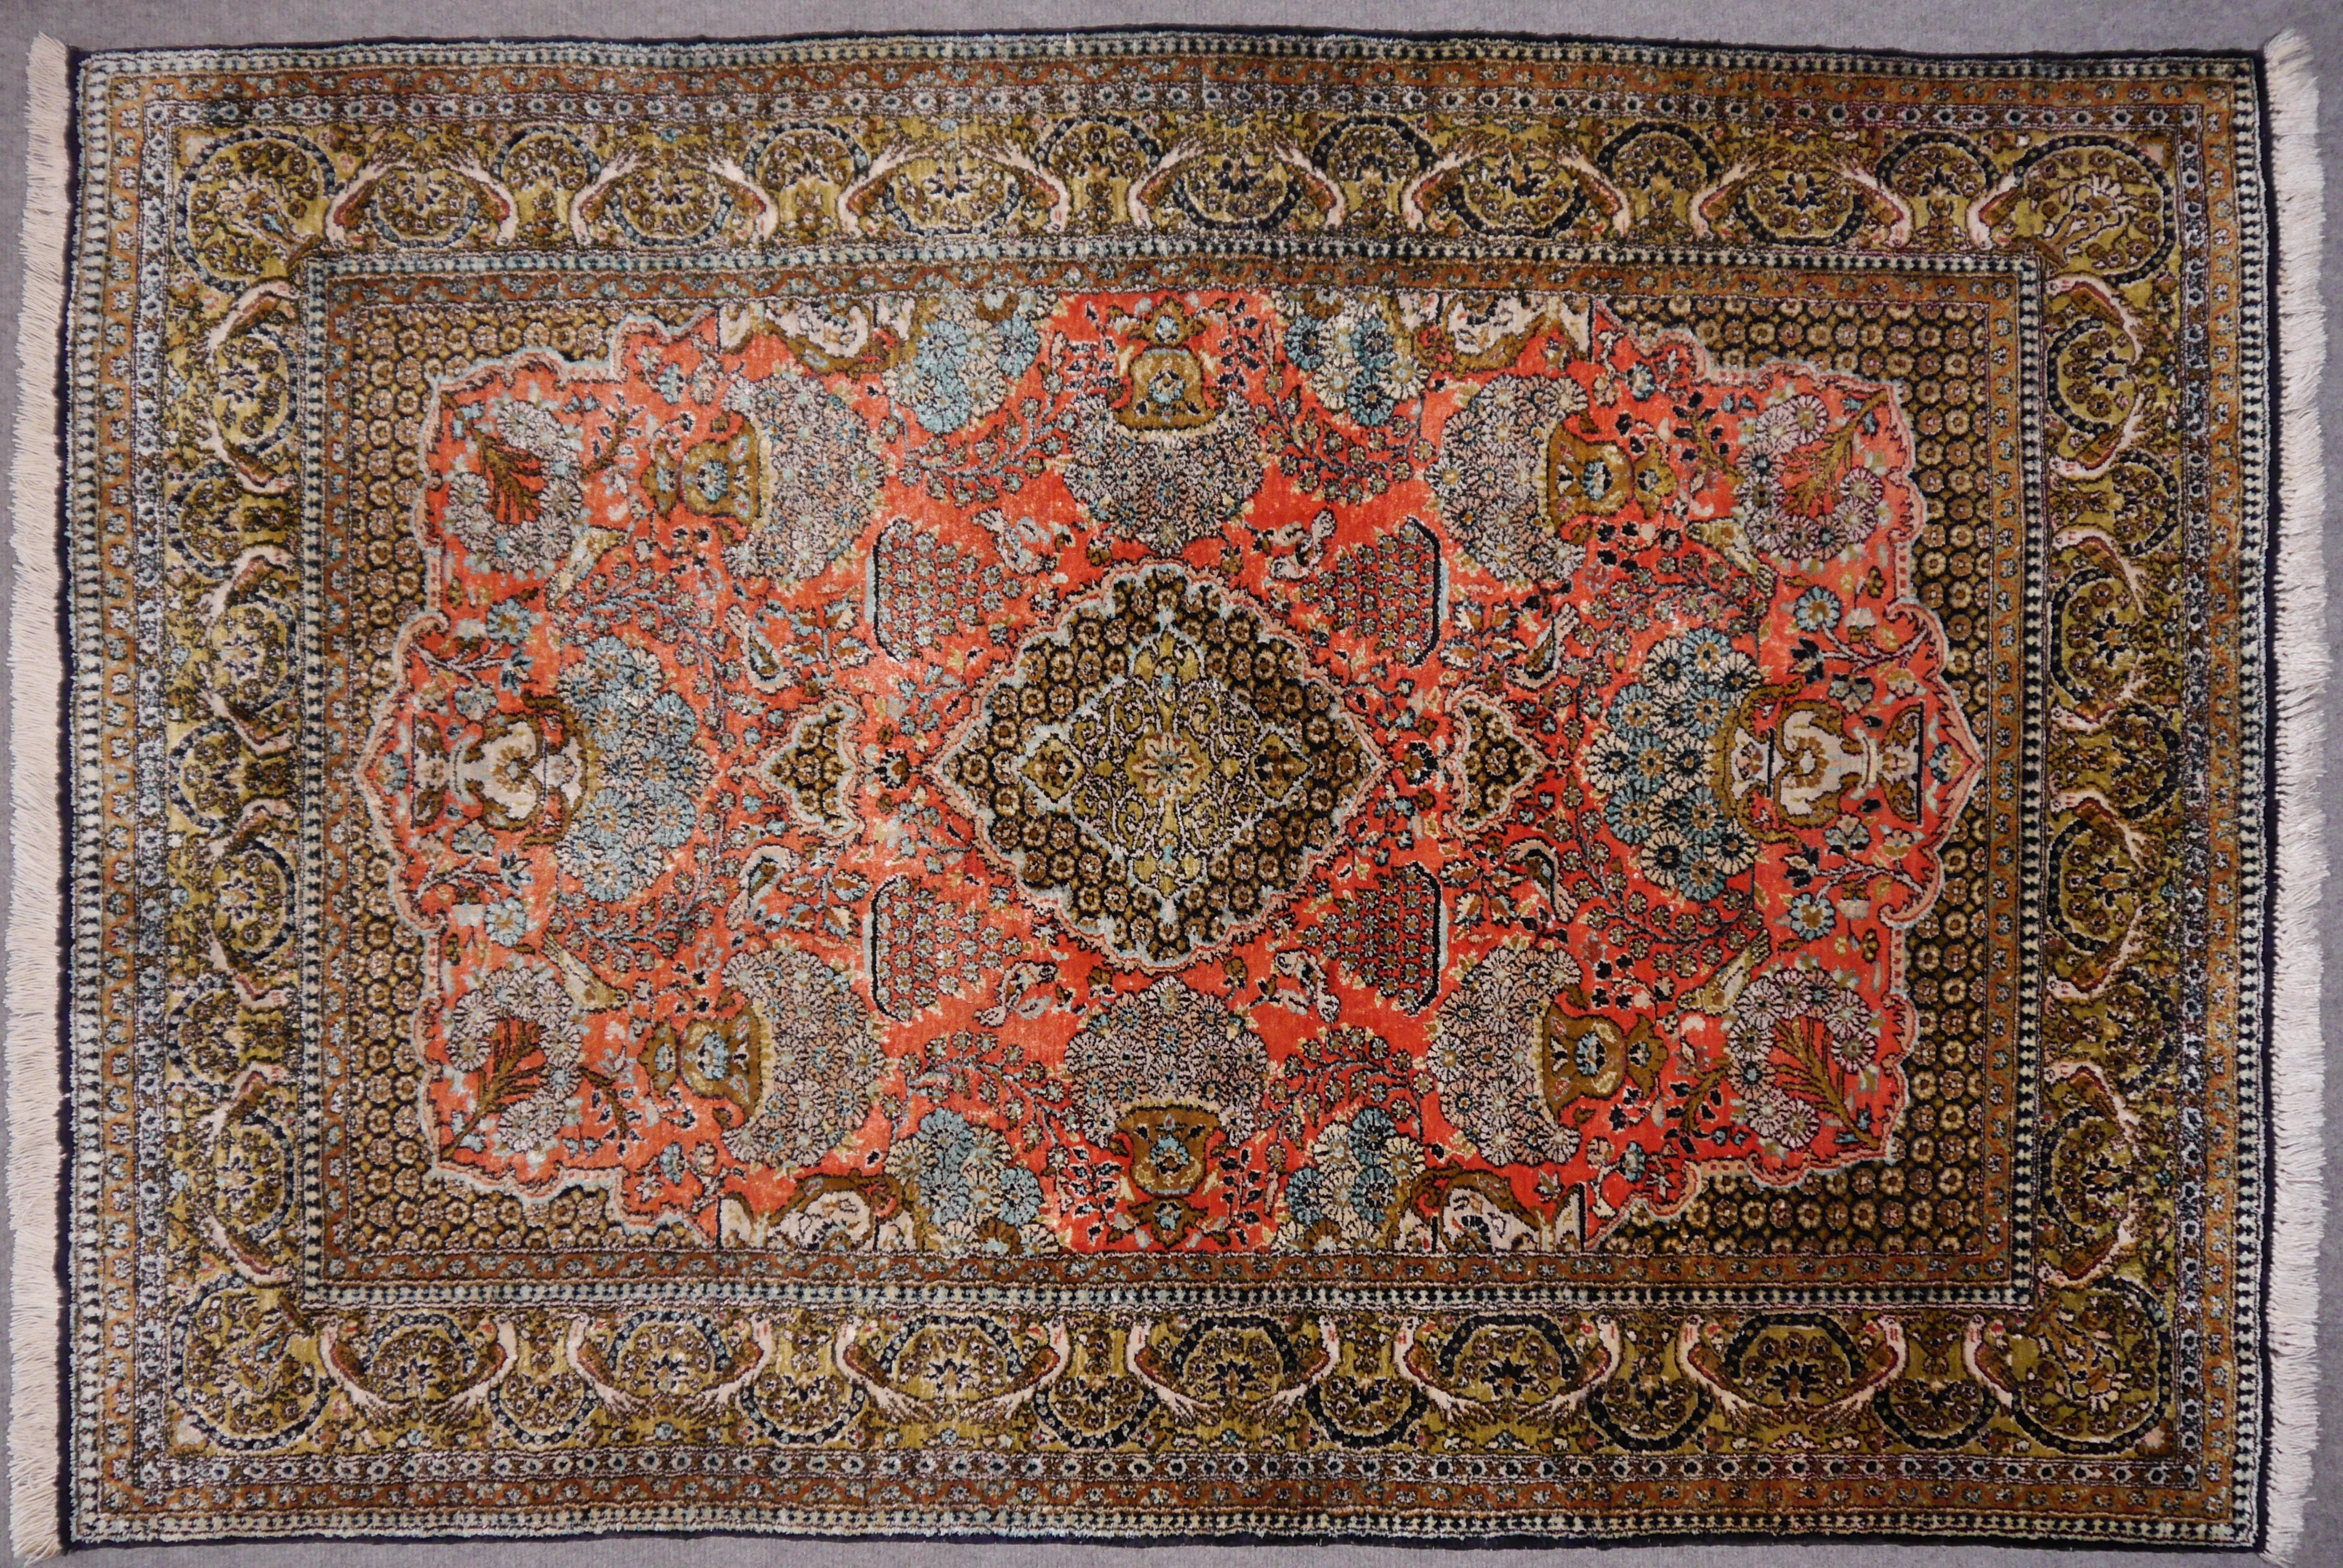 Qum Rug  Qom Rug  Ghom Rug  Hand-knotted Rug  5.2 x 3.6 ft / 155 x 108 cm
A very fine Qum silk carpet
Technique: hand knotted
Pile material: Silk
Warp: Silk
Quality: very fine knotted
Vintage rug
Floral with medallion. Very detailed work. 
Qum silk